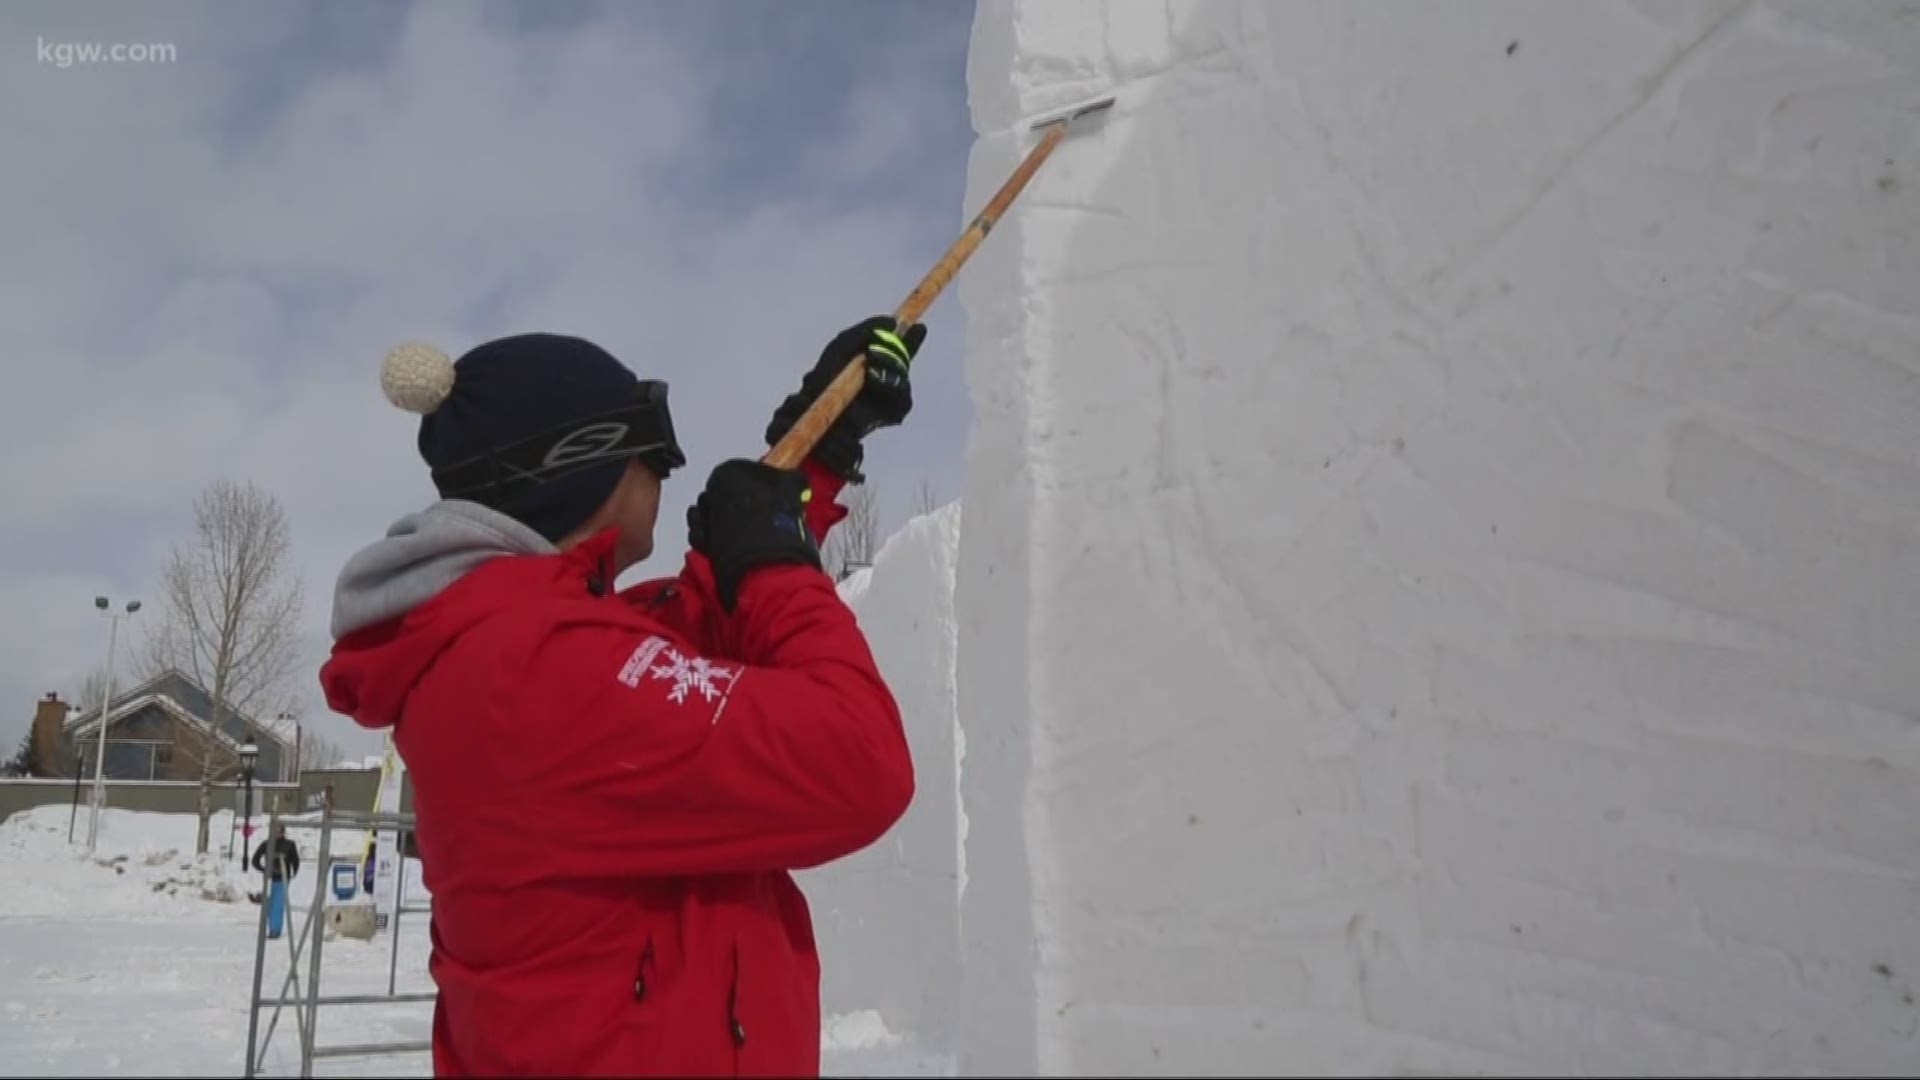 Artists from around the world are showing off their skills at the International Snow Sculpture Championships in Breckenridge, Colorado.
snowsculpt.com
#TonightwithCassidy